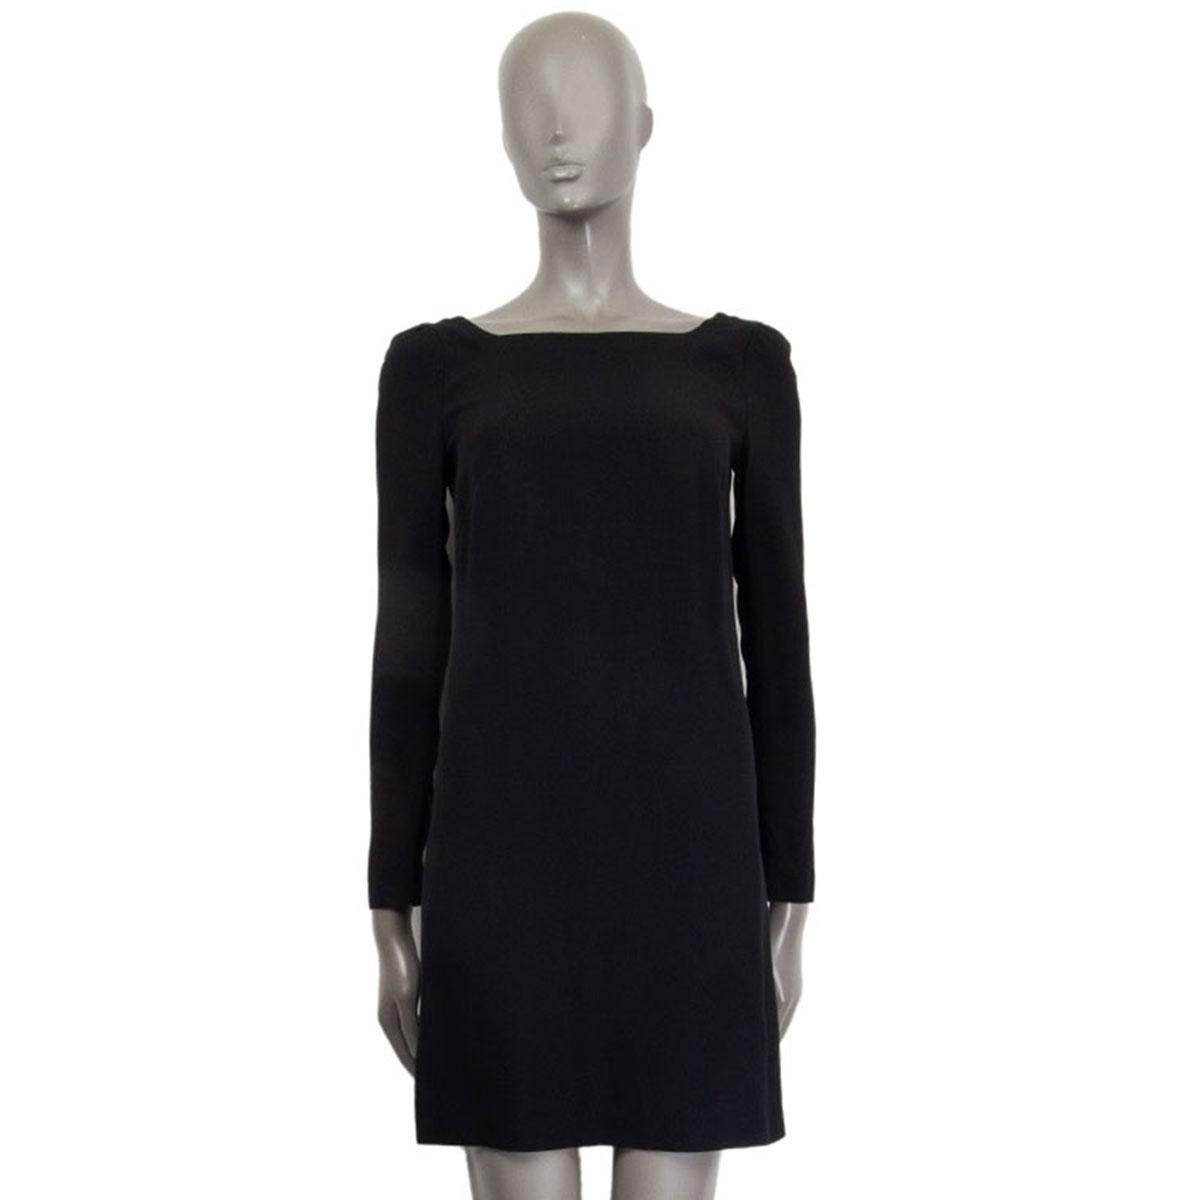 authentic Prada long-sleeve dress in black acetate (74%) and viscose (26%) with a deep back neckline. Opens with a zipper on the back and has a hidden zipper on the cuff. Has been worn and is in excellent condition. 

Tag Size 38
Size XS
Shoulder